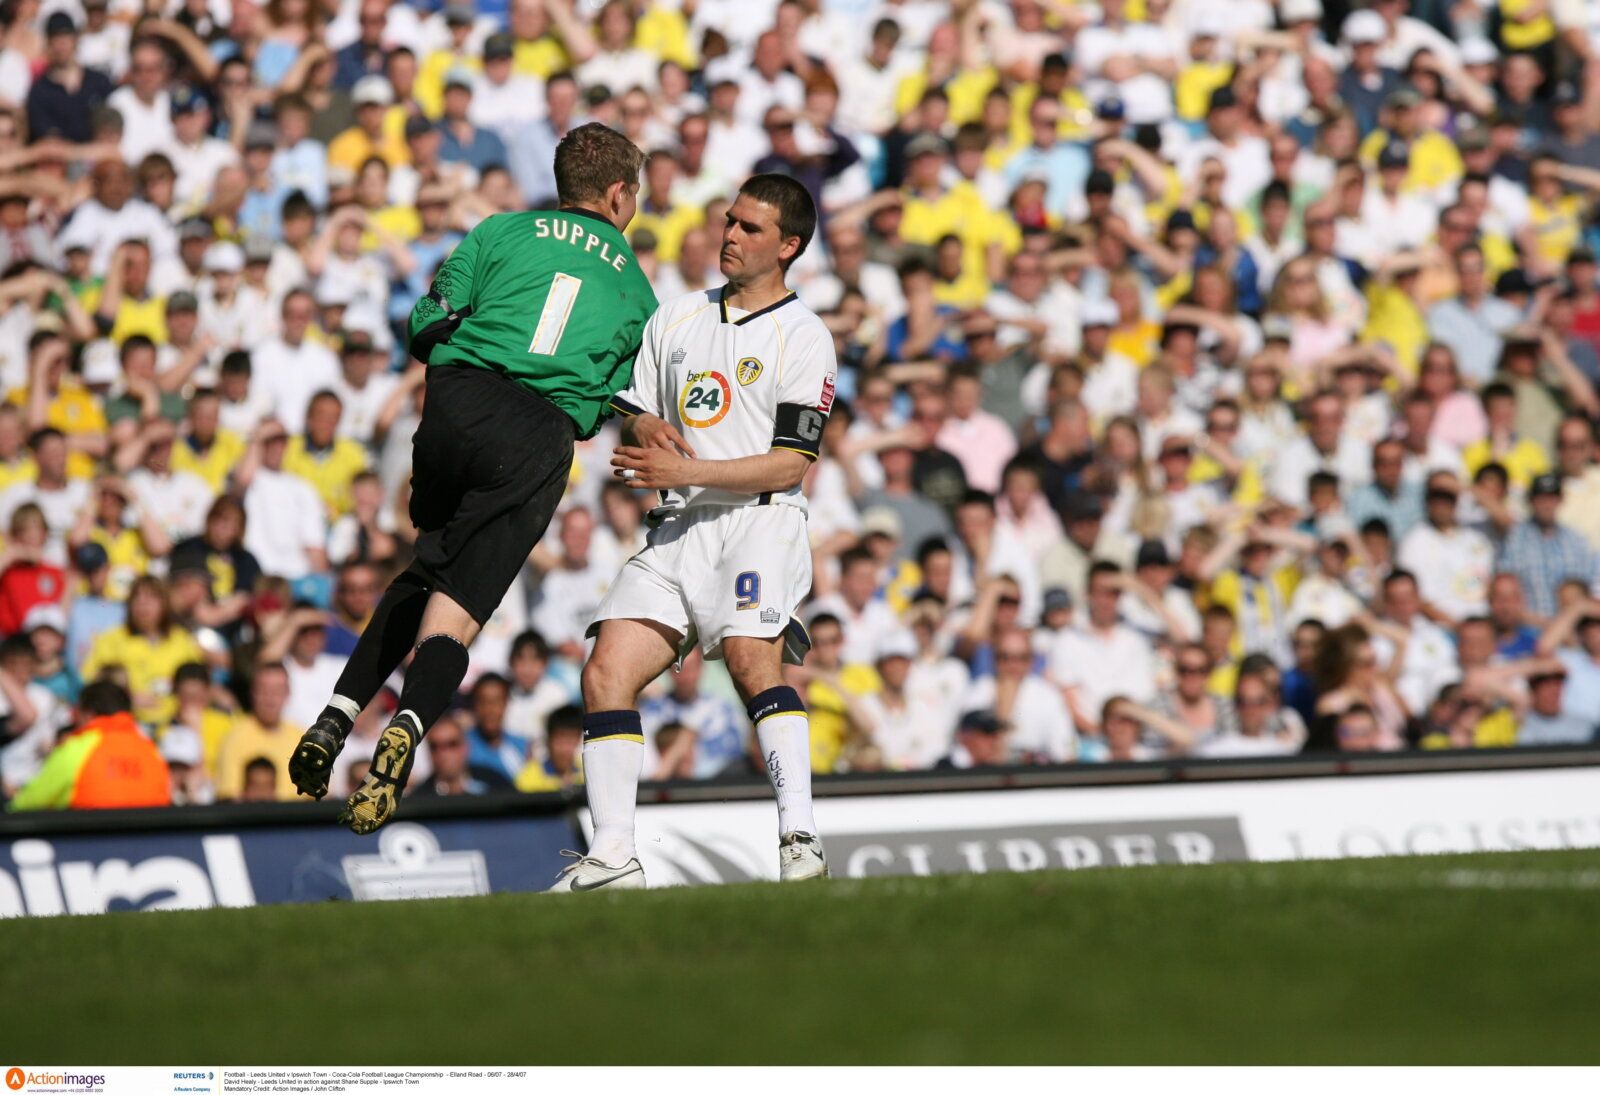 Football - Leeds United v Ipswich Town - Coca-Cola Football League Championship  - Elland Road - 06/07 - 28/4/07 
David Healy - Leeds United in action against Shane Supple - Ipswich Town 
Mandatory Credit: Action Images / John Clifton